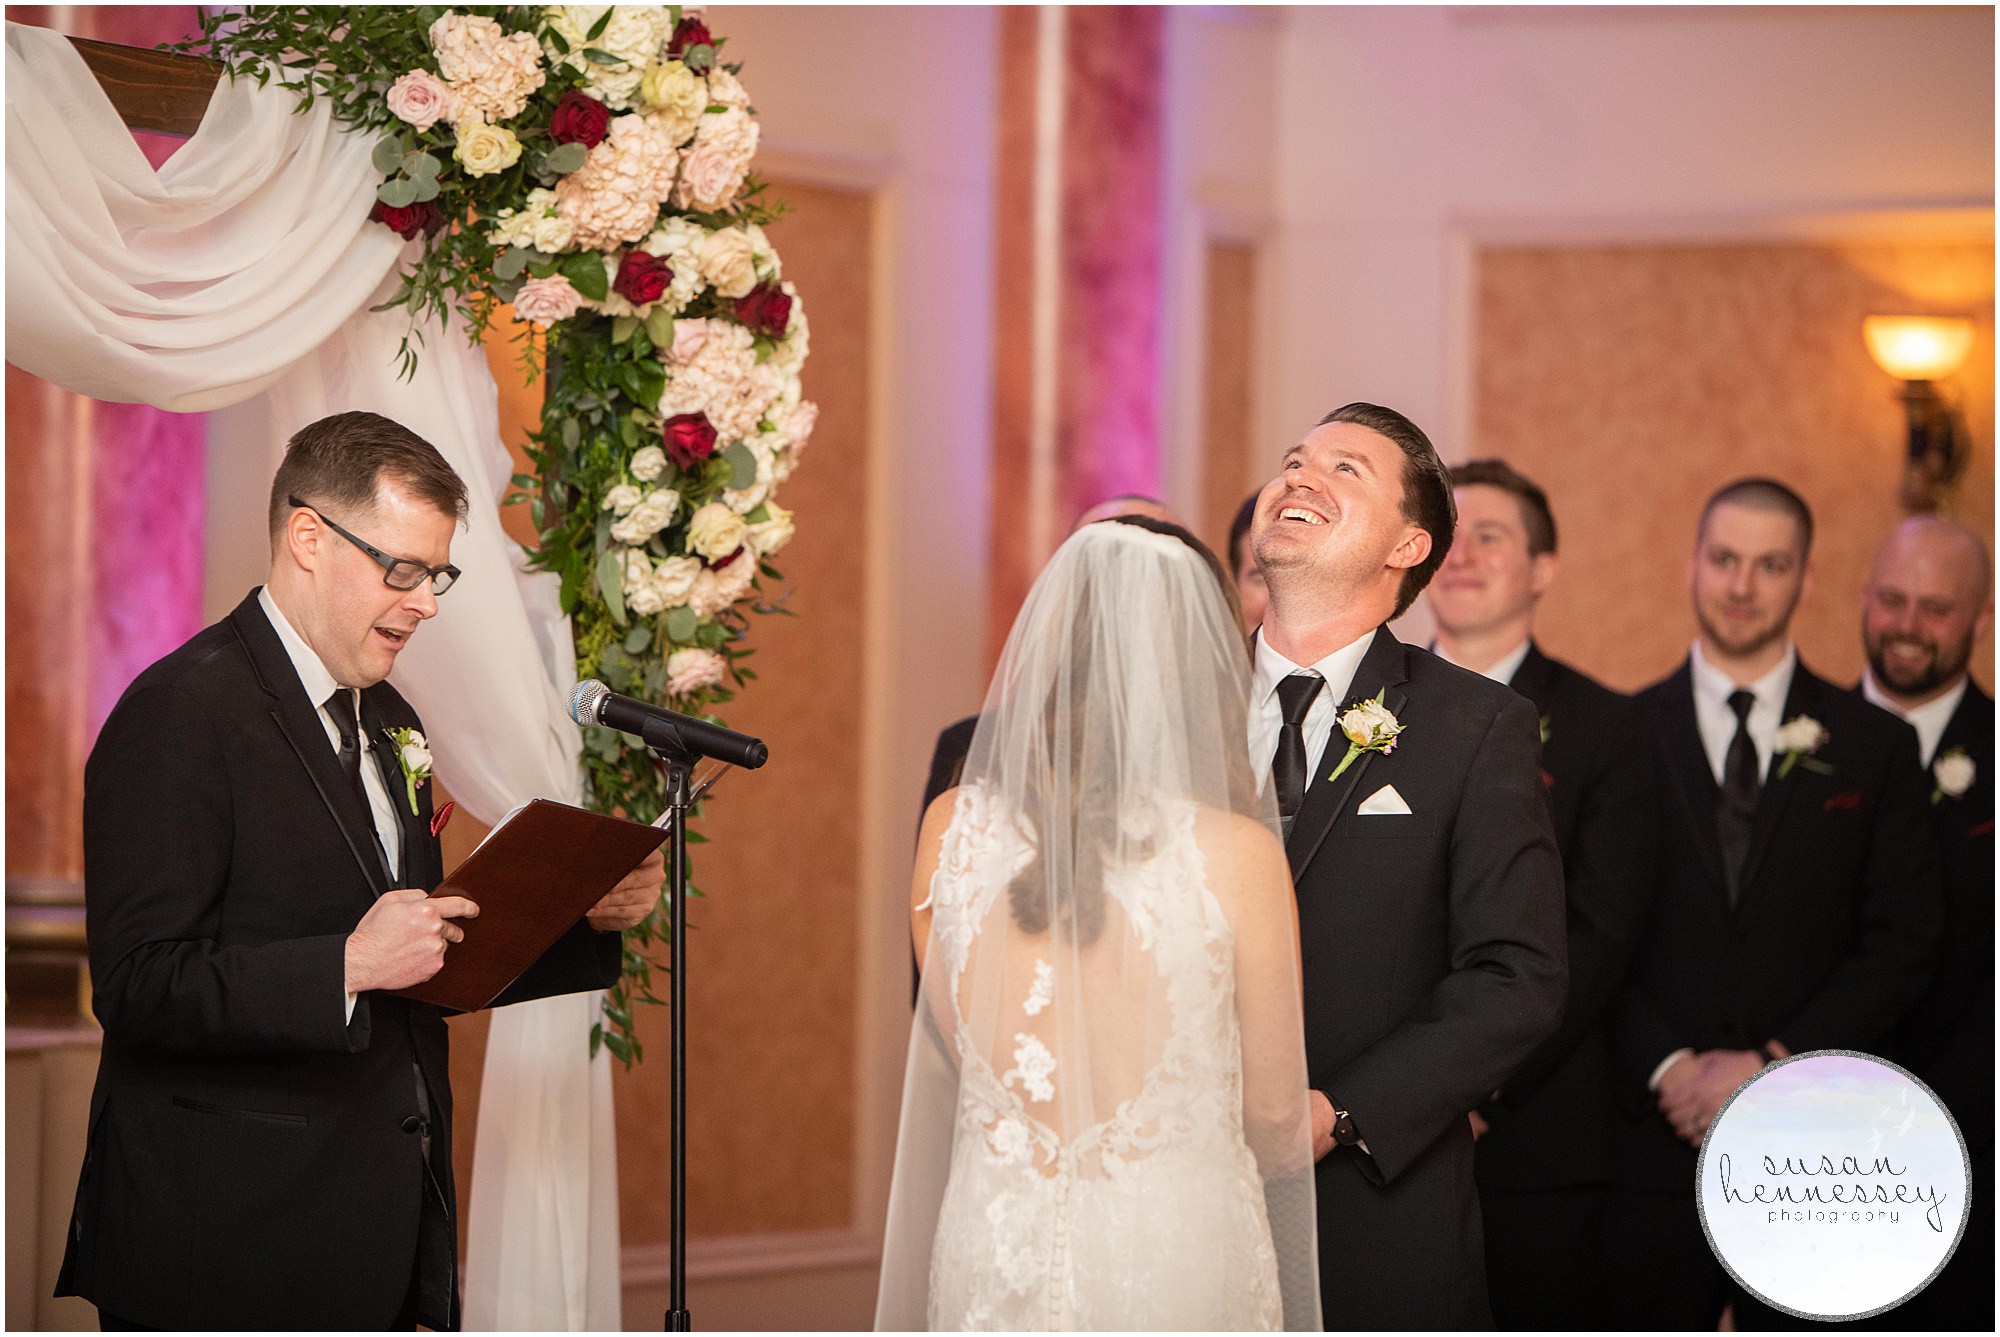 Groom laughs during ceremony at the merion